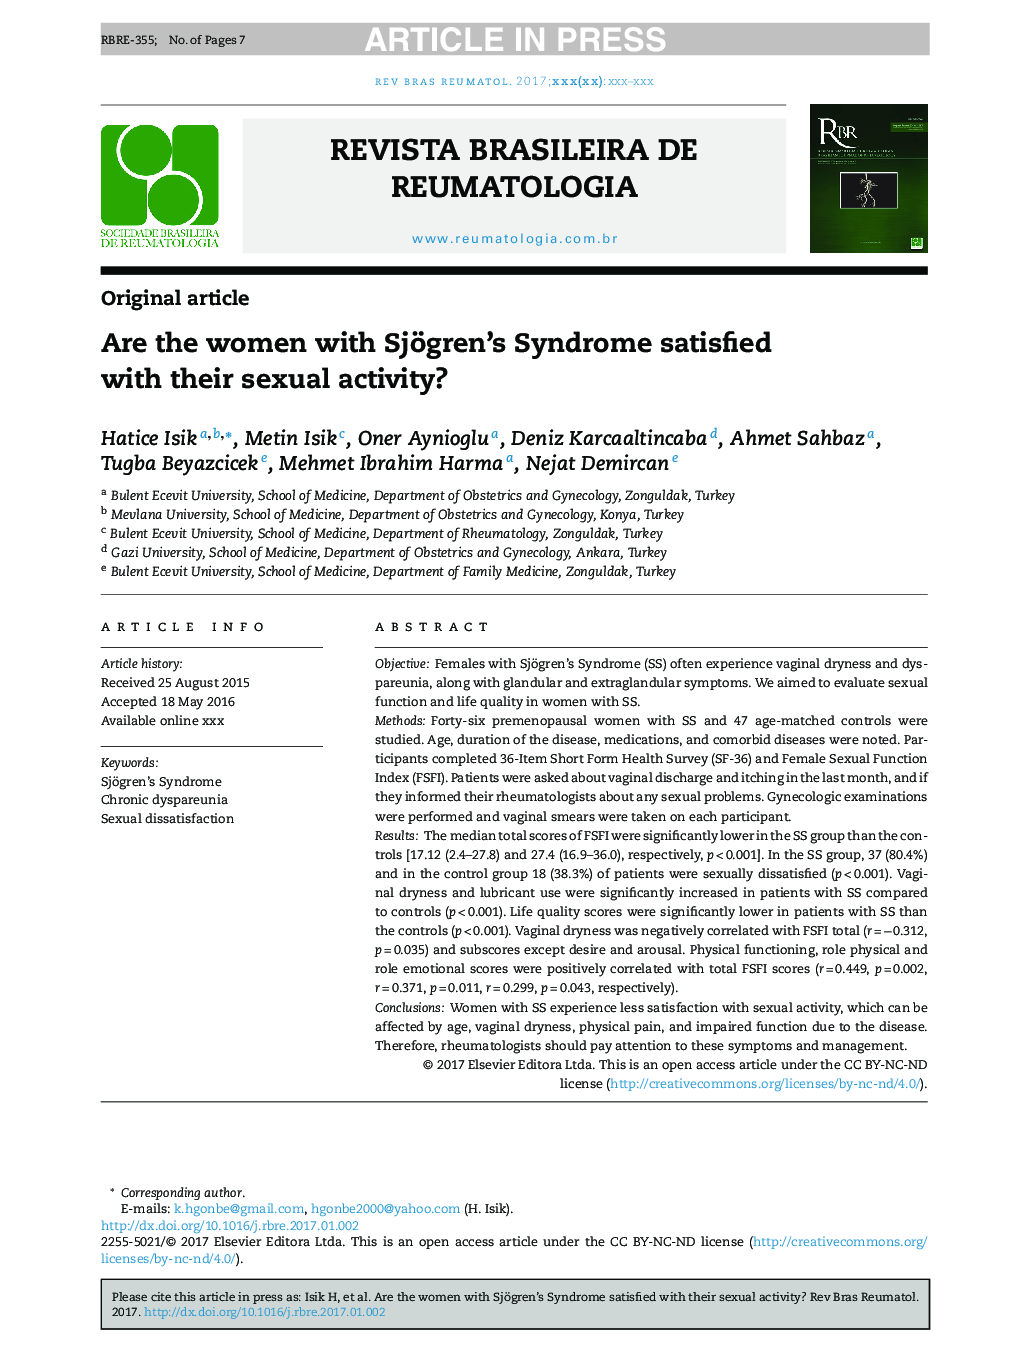 Are the women with Sjögren's Syndrome satisfied with their sexual activity?